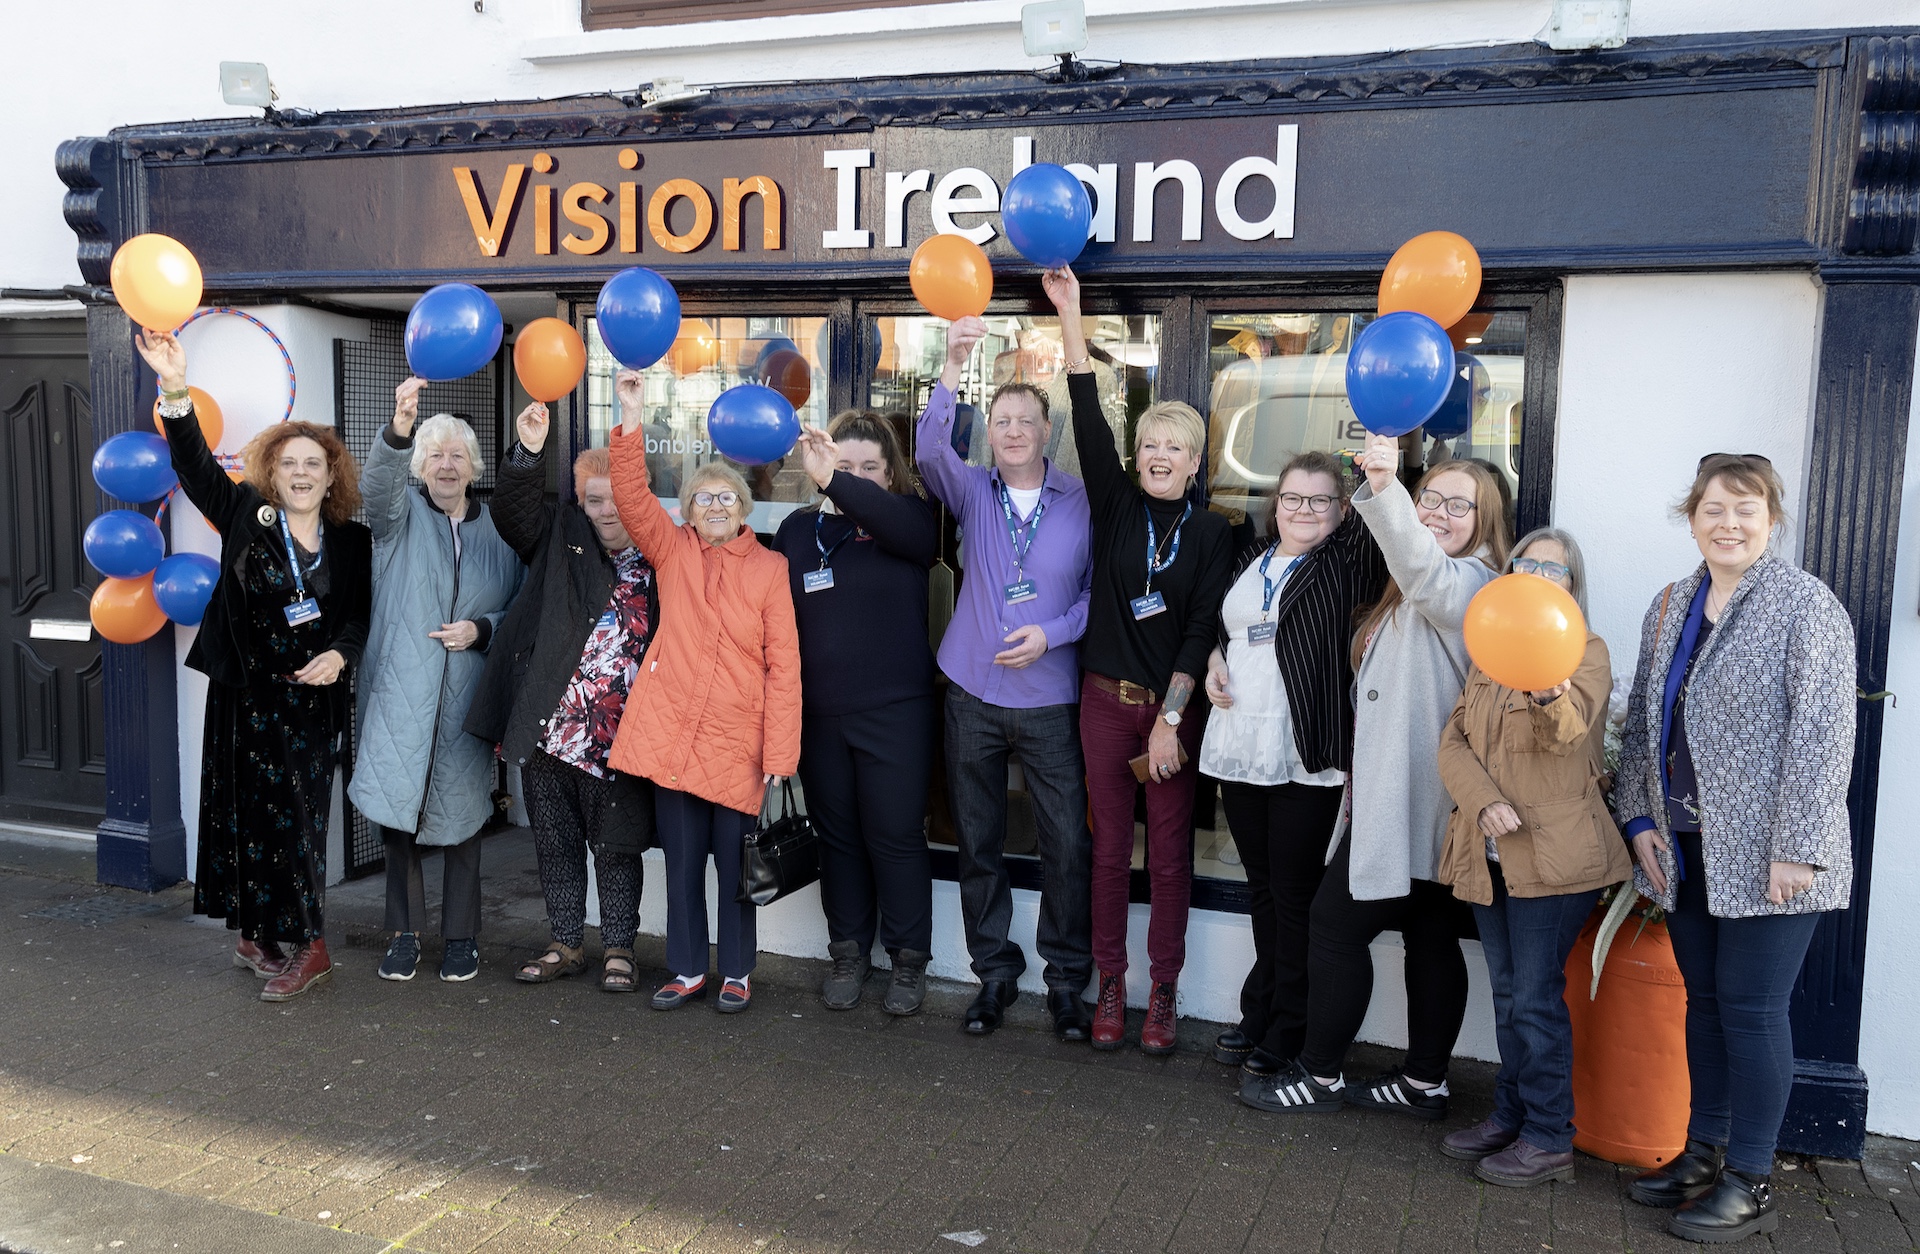 A group of people standing outside a Vision Ireland store and holding up blue, white and orange balloons which match the storefront colours.